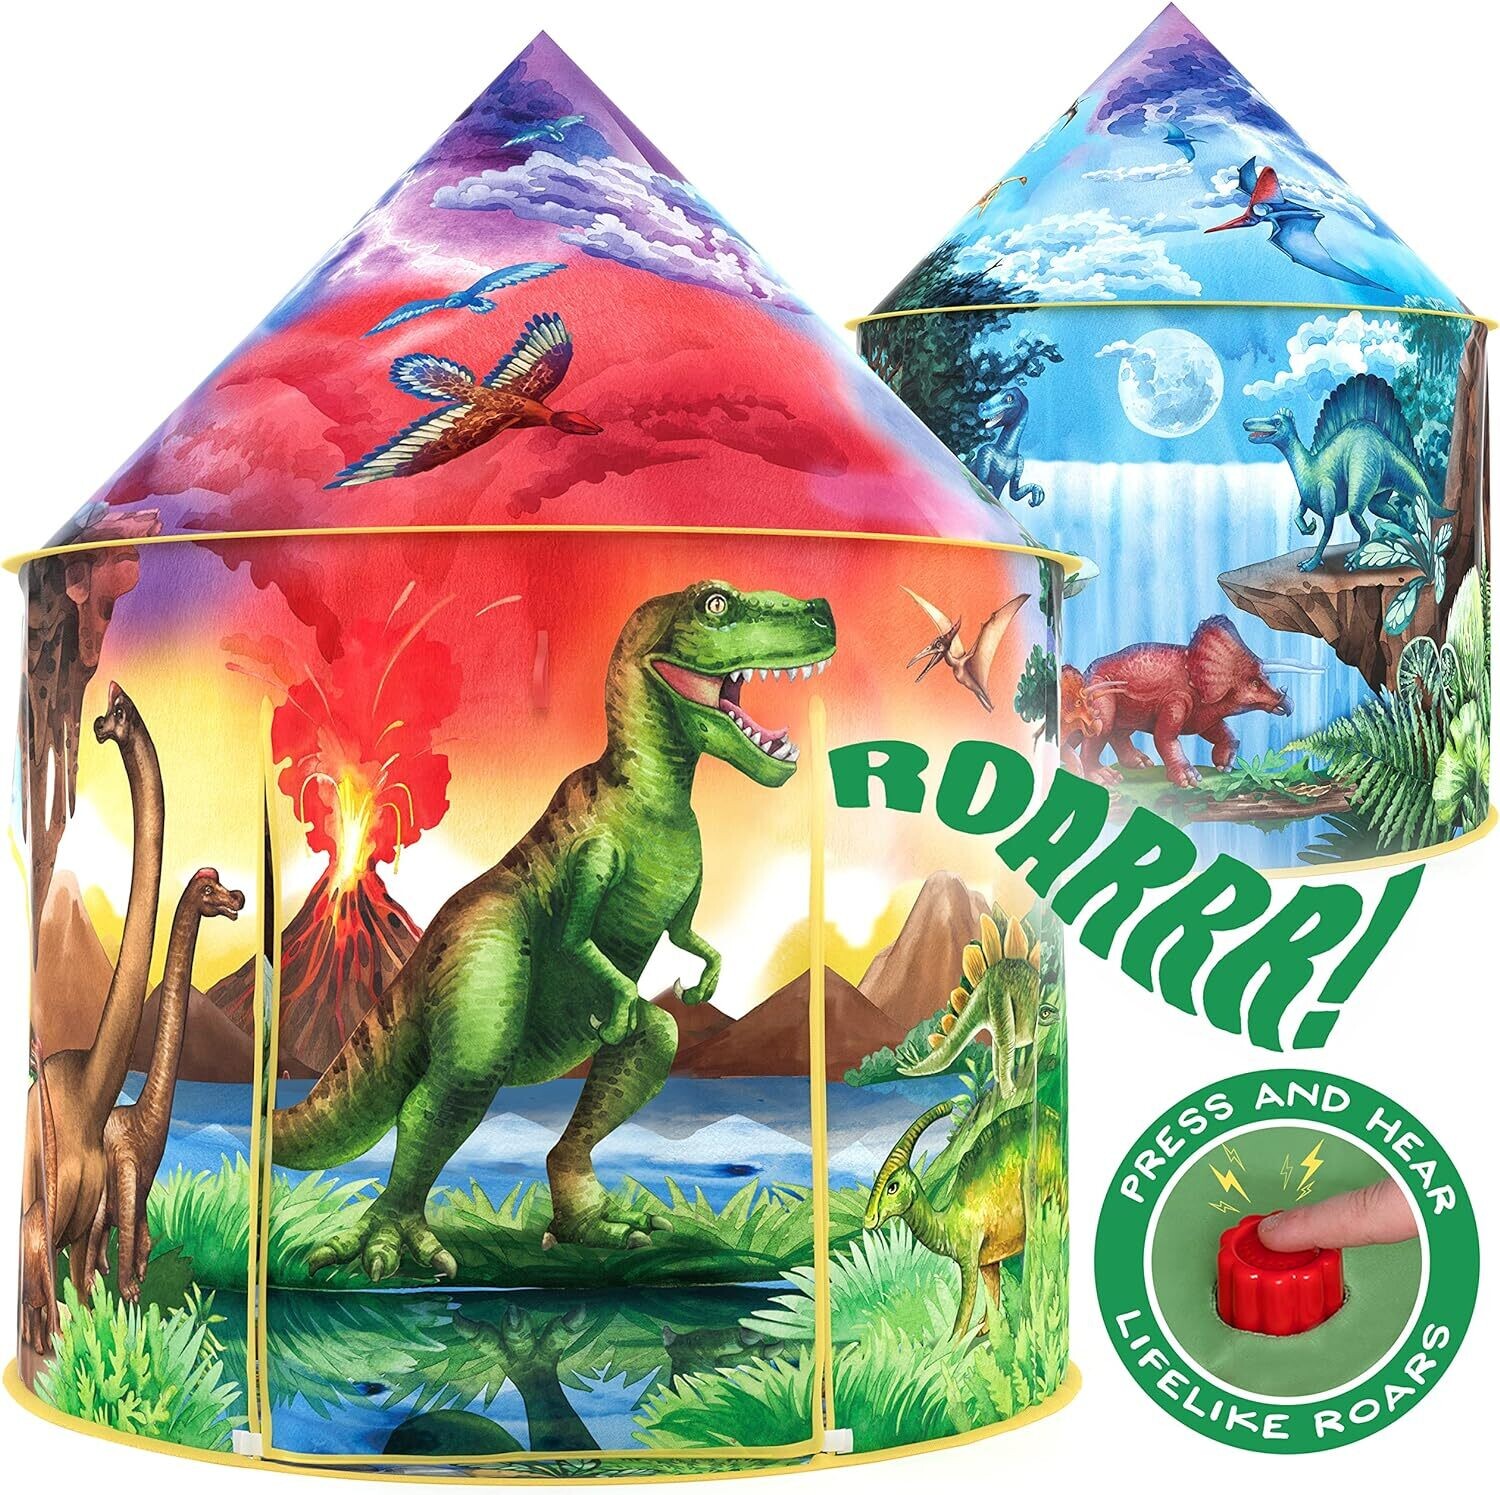 Dinosaur Discovery Play Tent with Roar Button Pop Up Tents for Kids, Indoor & Outdoor Kids Playhouse